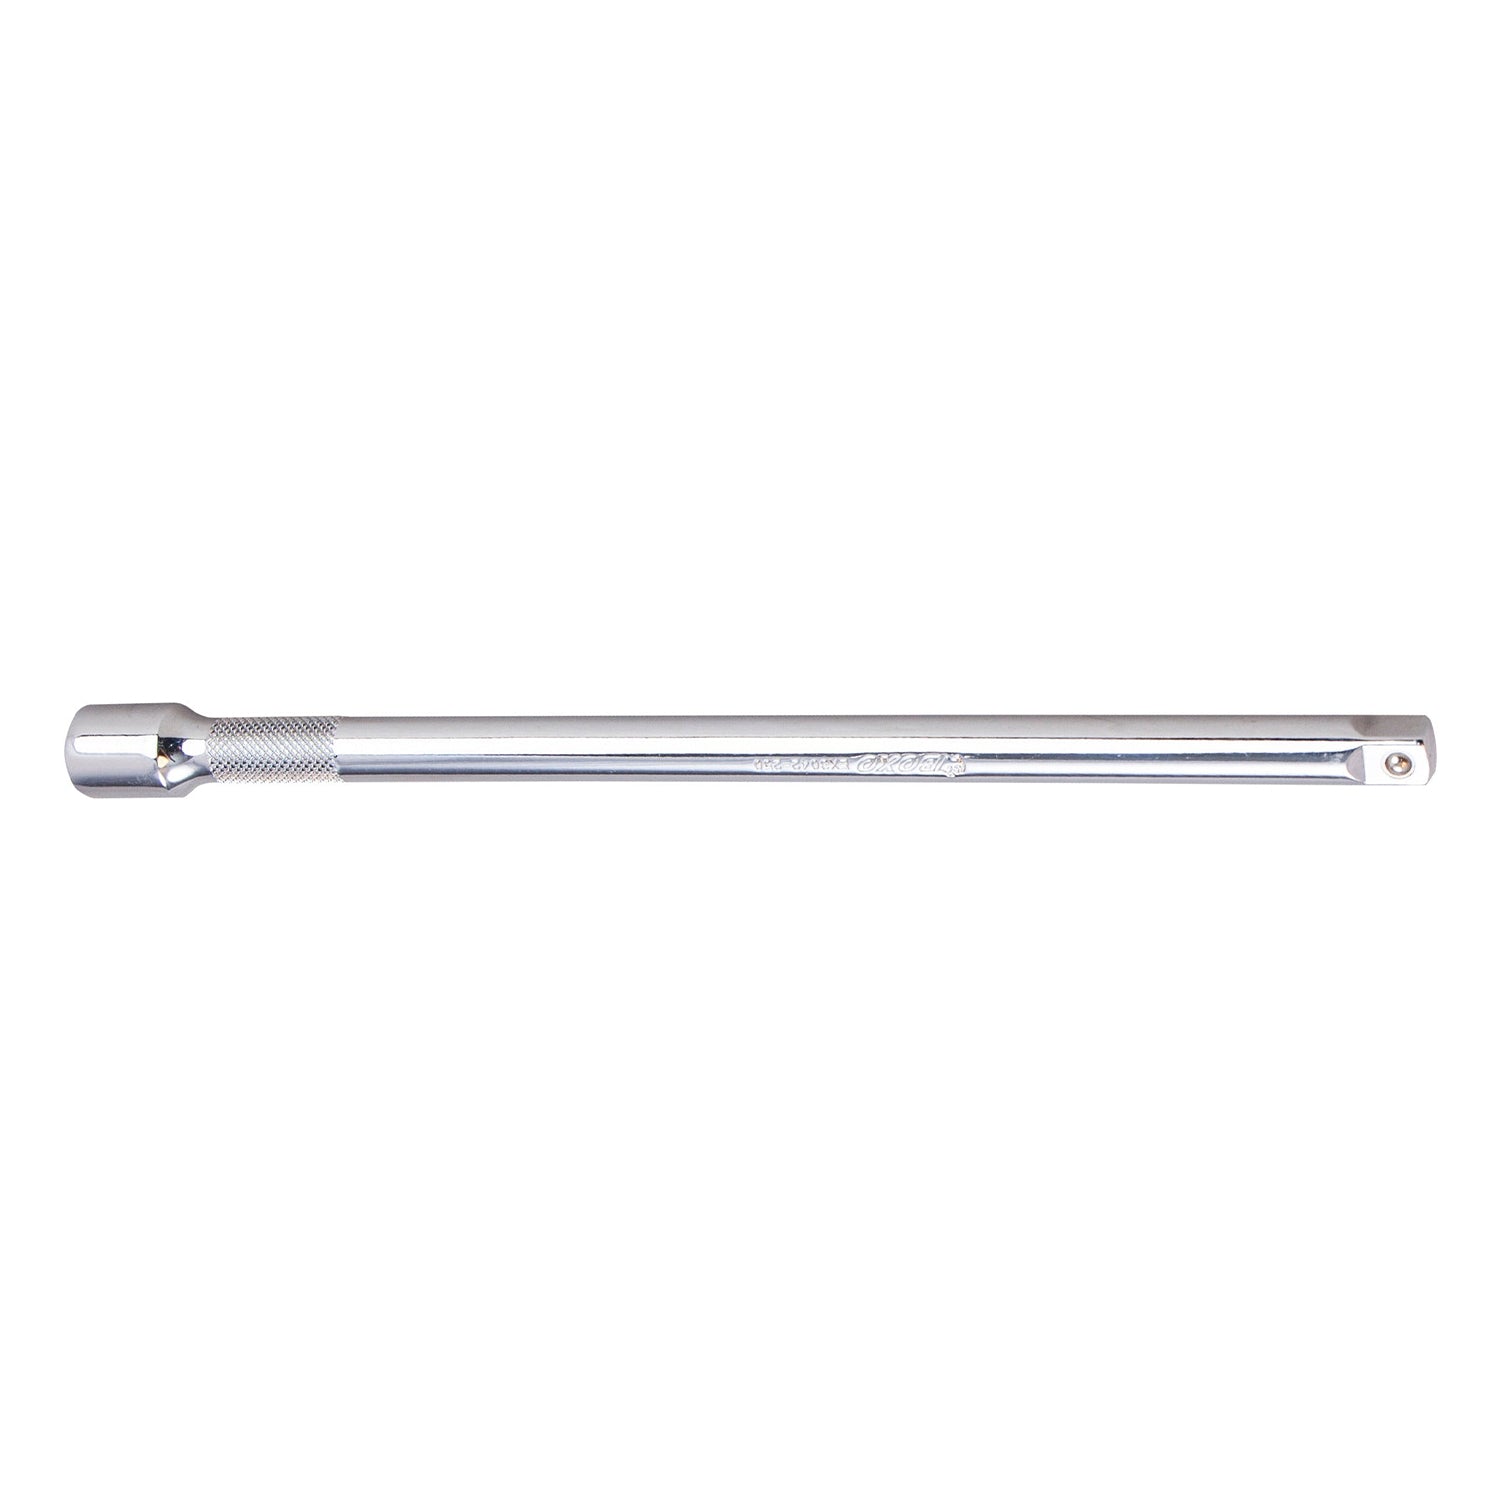 BOXO 1/2" Extension Bars - Sizes 75mm to 250mm